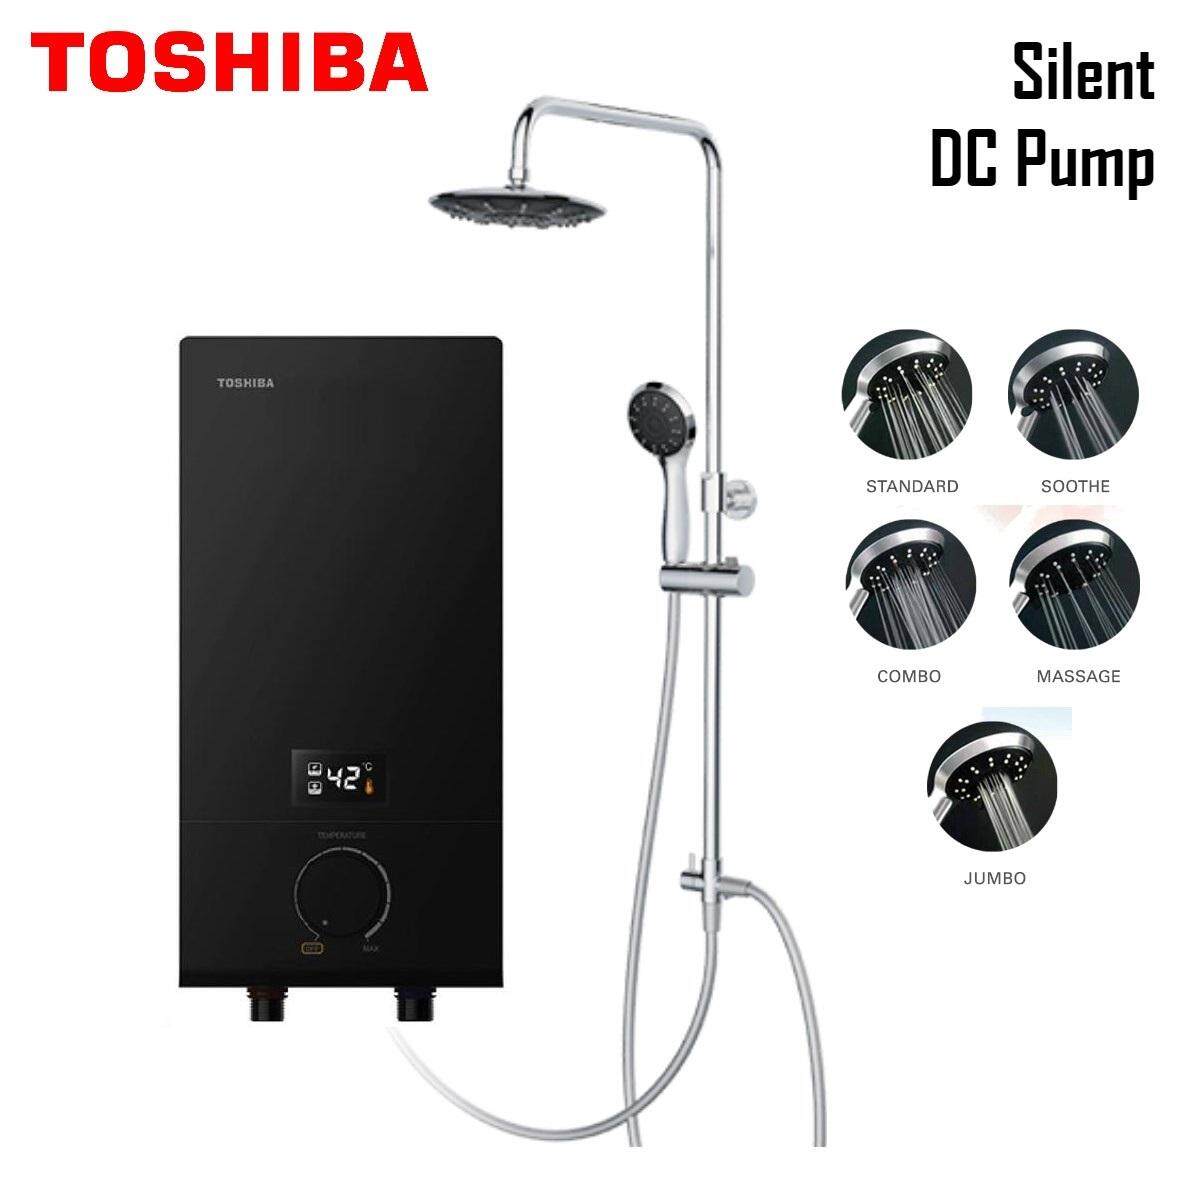 Toshiba(AUTHORISED DEALER) Instant Electric Water Heater with Pump + Rain Shower DSK38ES3MBRS - Toshiba Warranty Malaysia